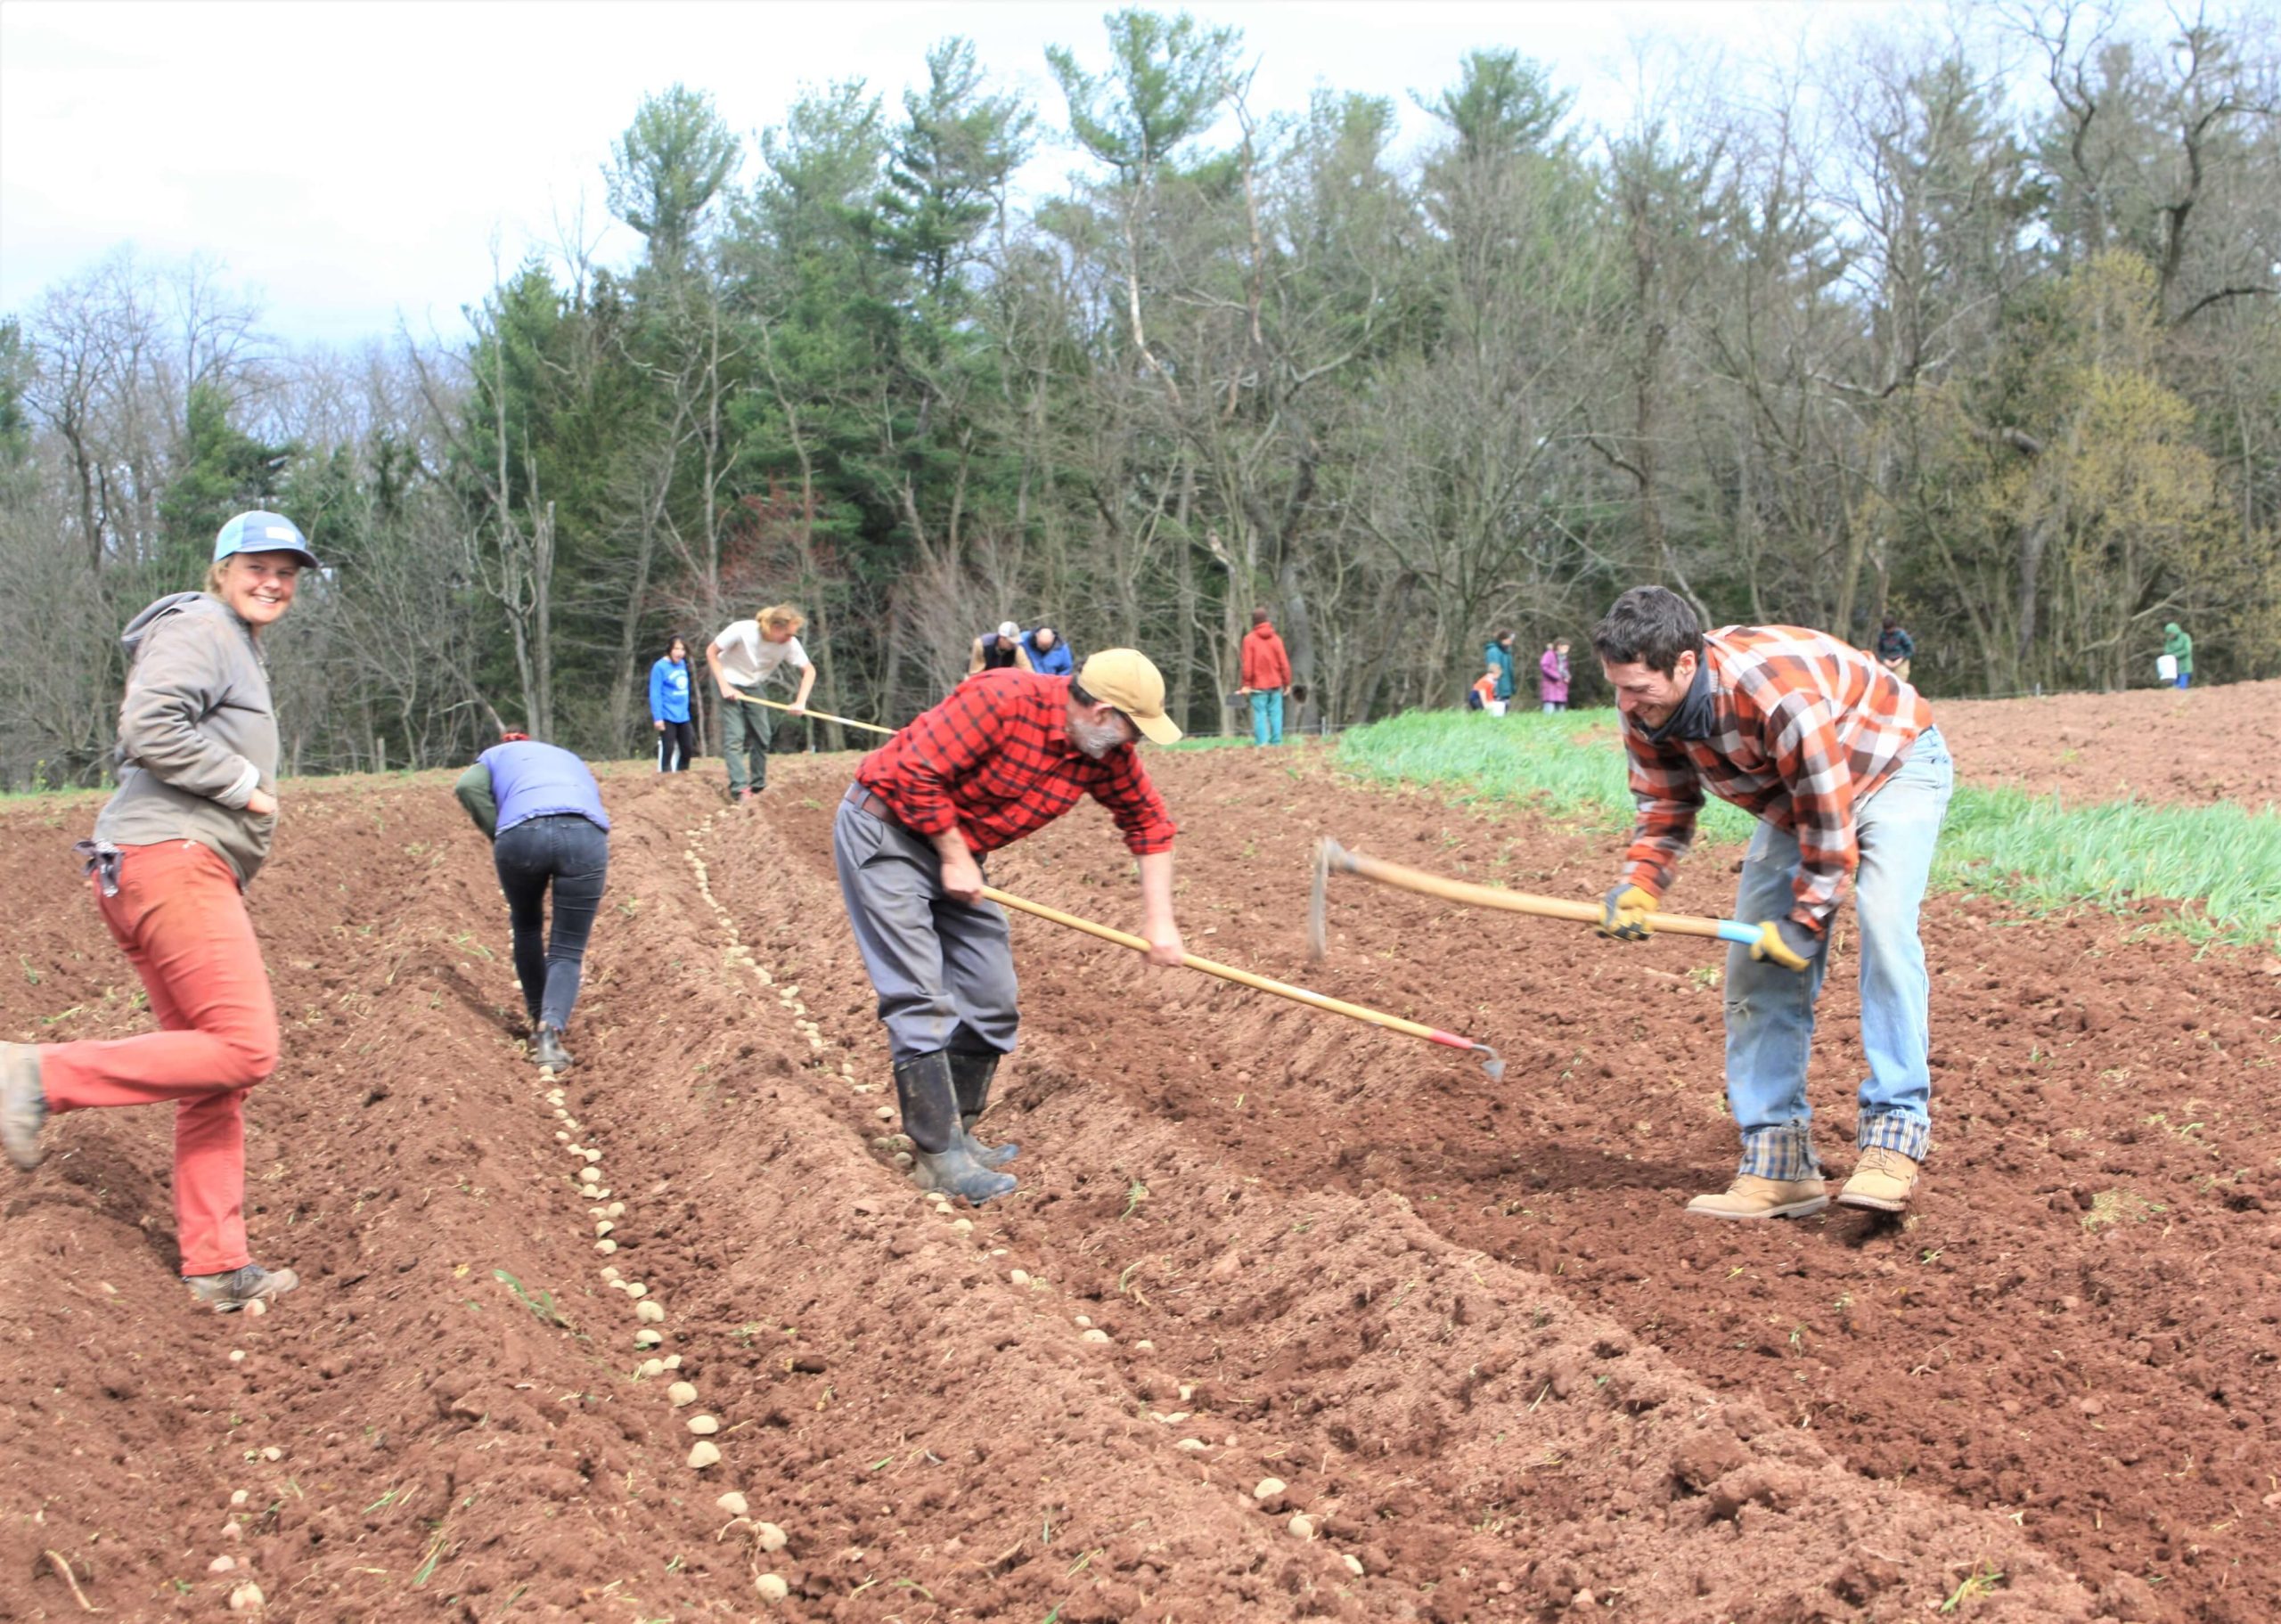 A dozen people working in a field, some with garden tools, planting rows of potatoes